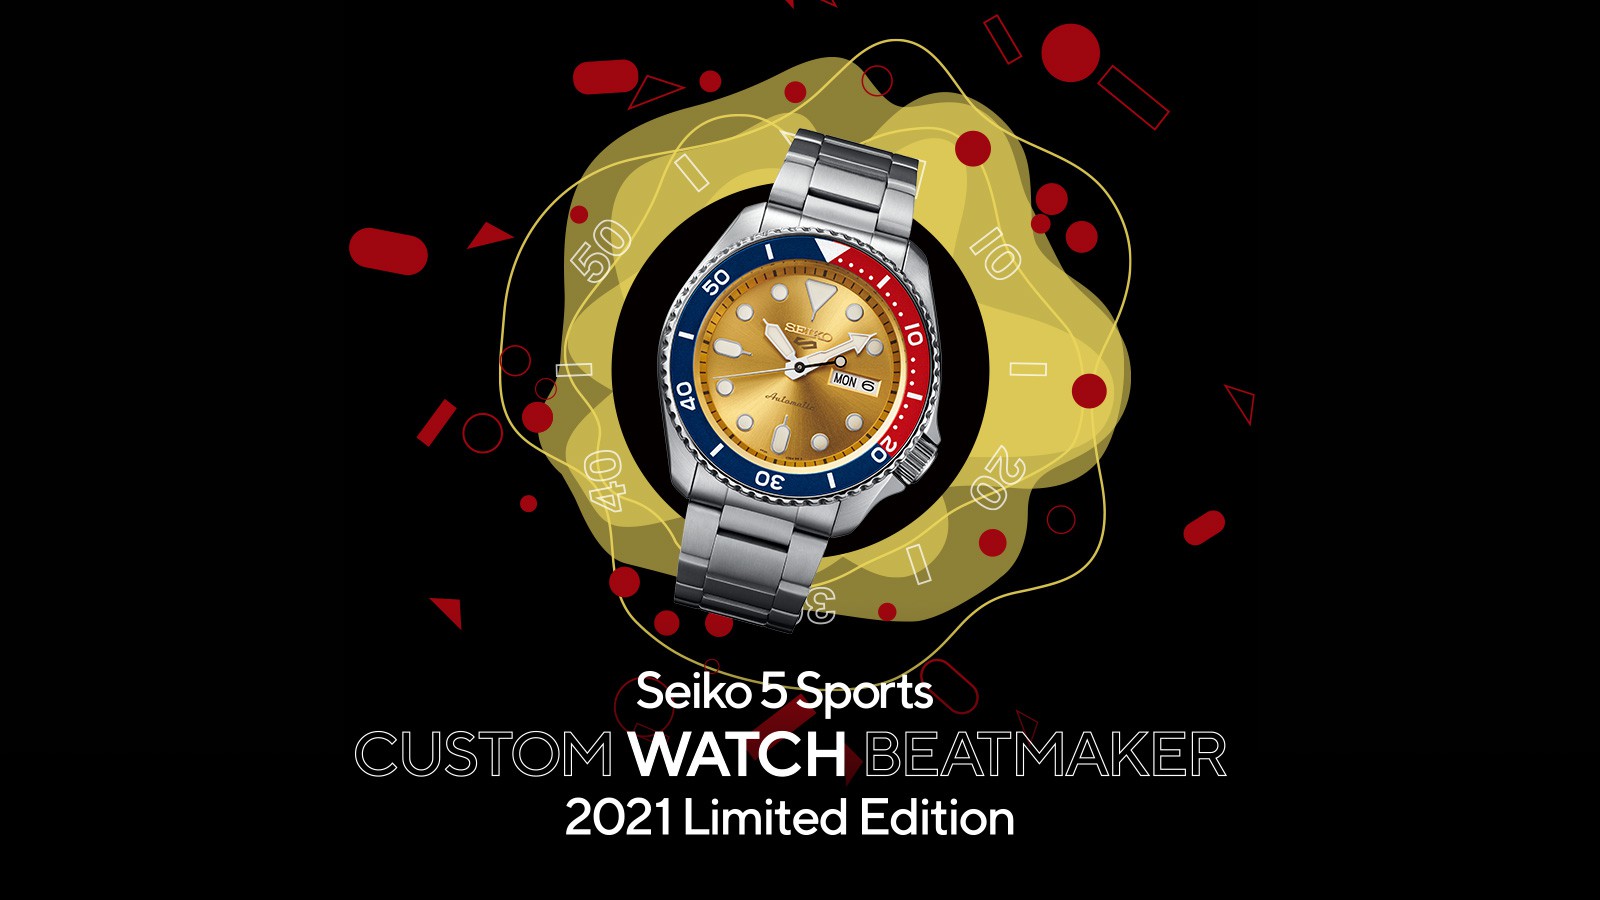 er mere end ungdomskriminalitet Medarbejder The winning watch from the CUSTOM WATCH BEATMAKER campaign joins the Seiko  5 Sports collection. | Seiko Watch Corporation